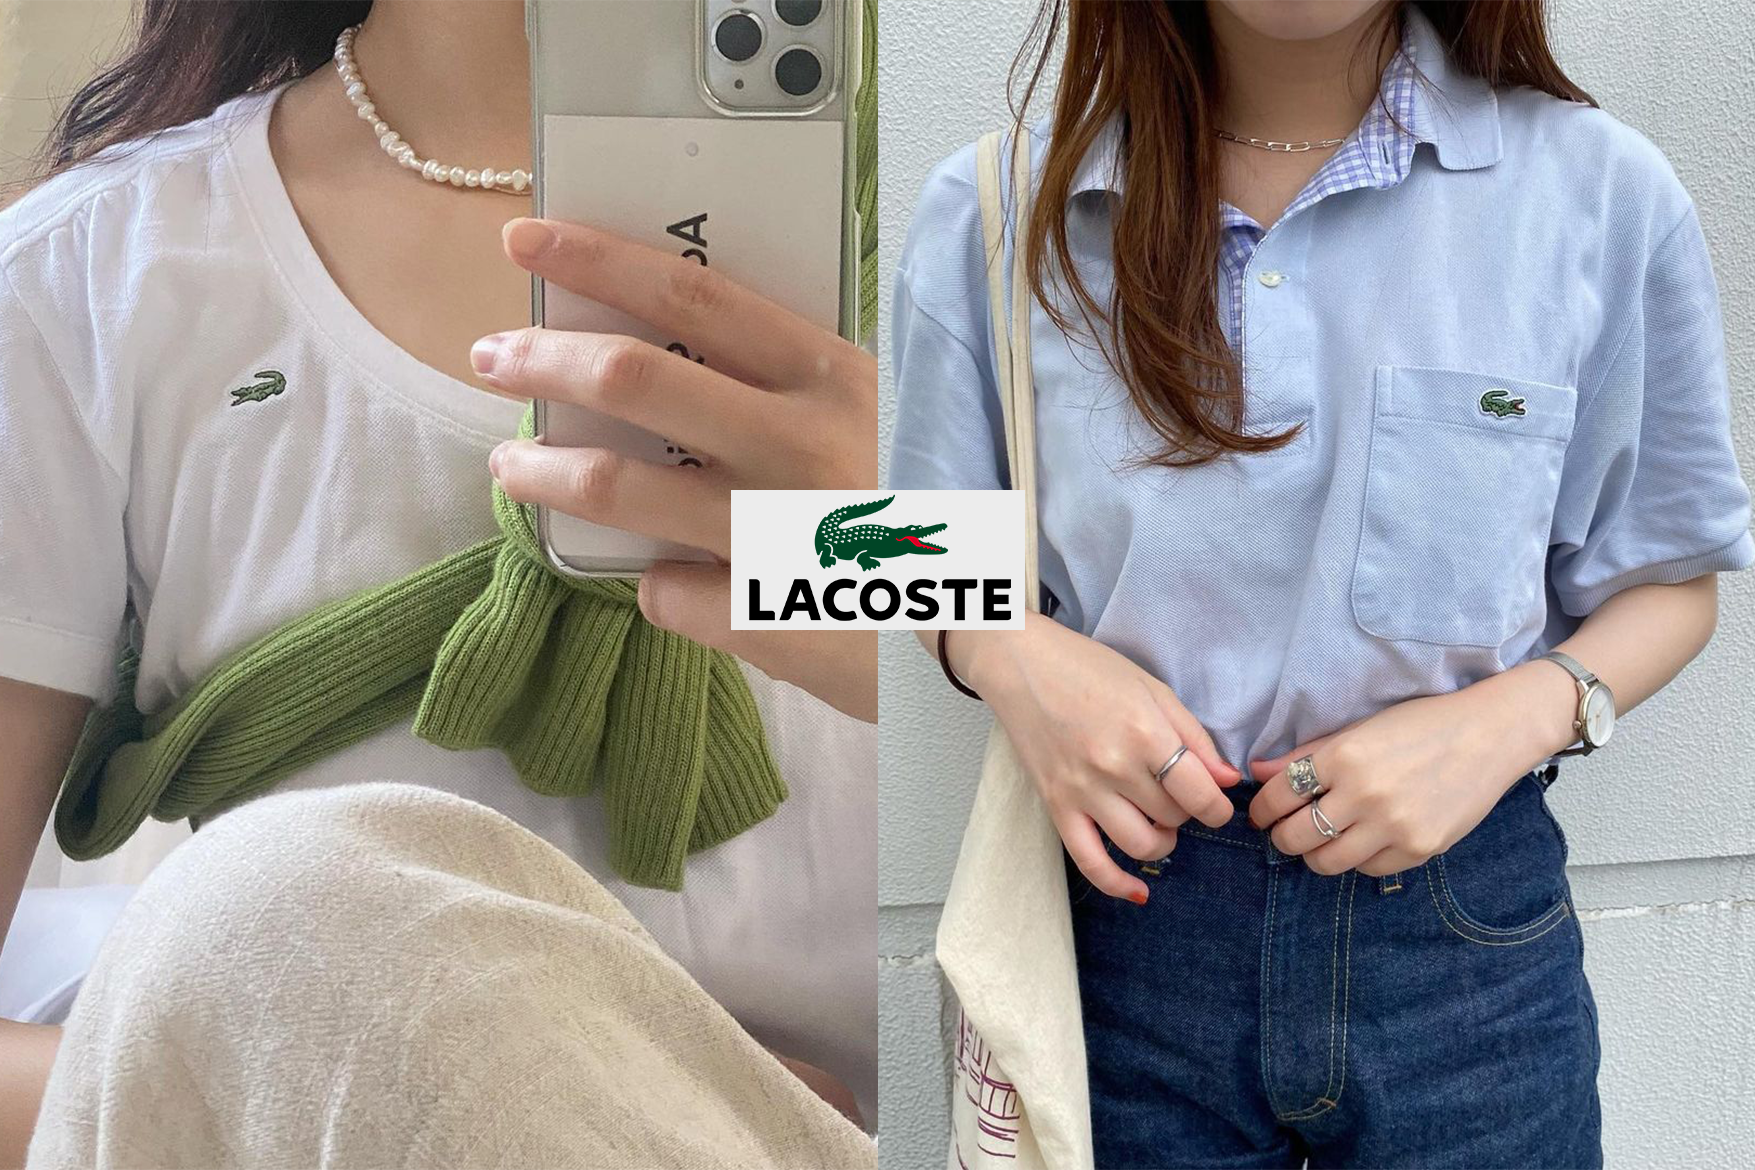 Lacoste-tops-can-be-seen-everywhere-among-Japanese-Girls-IG-02